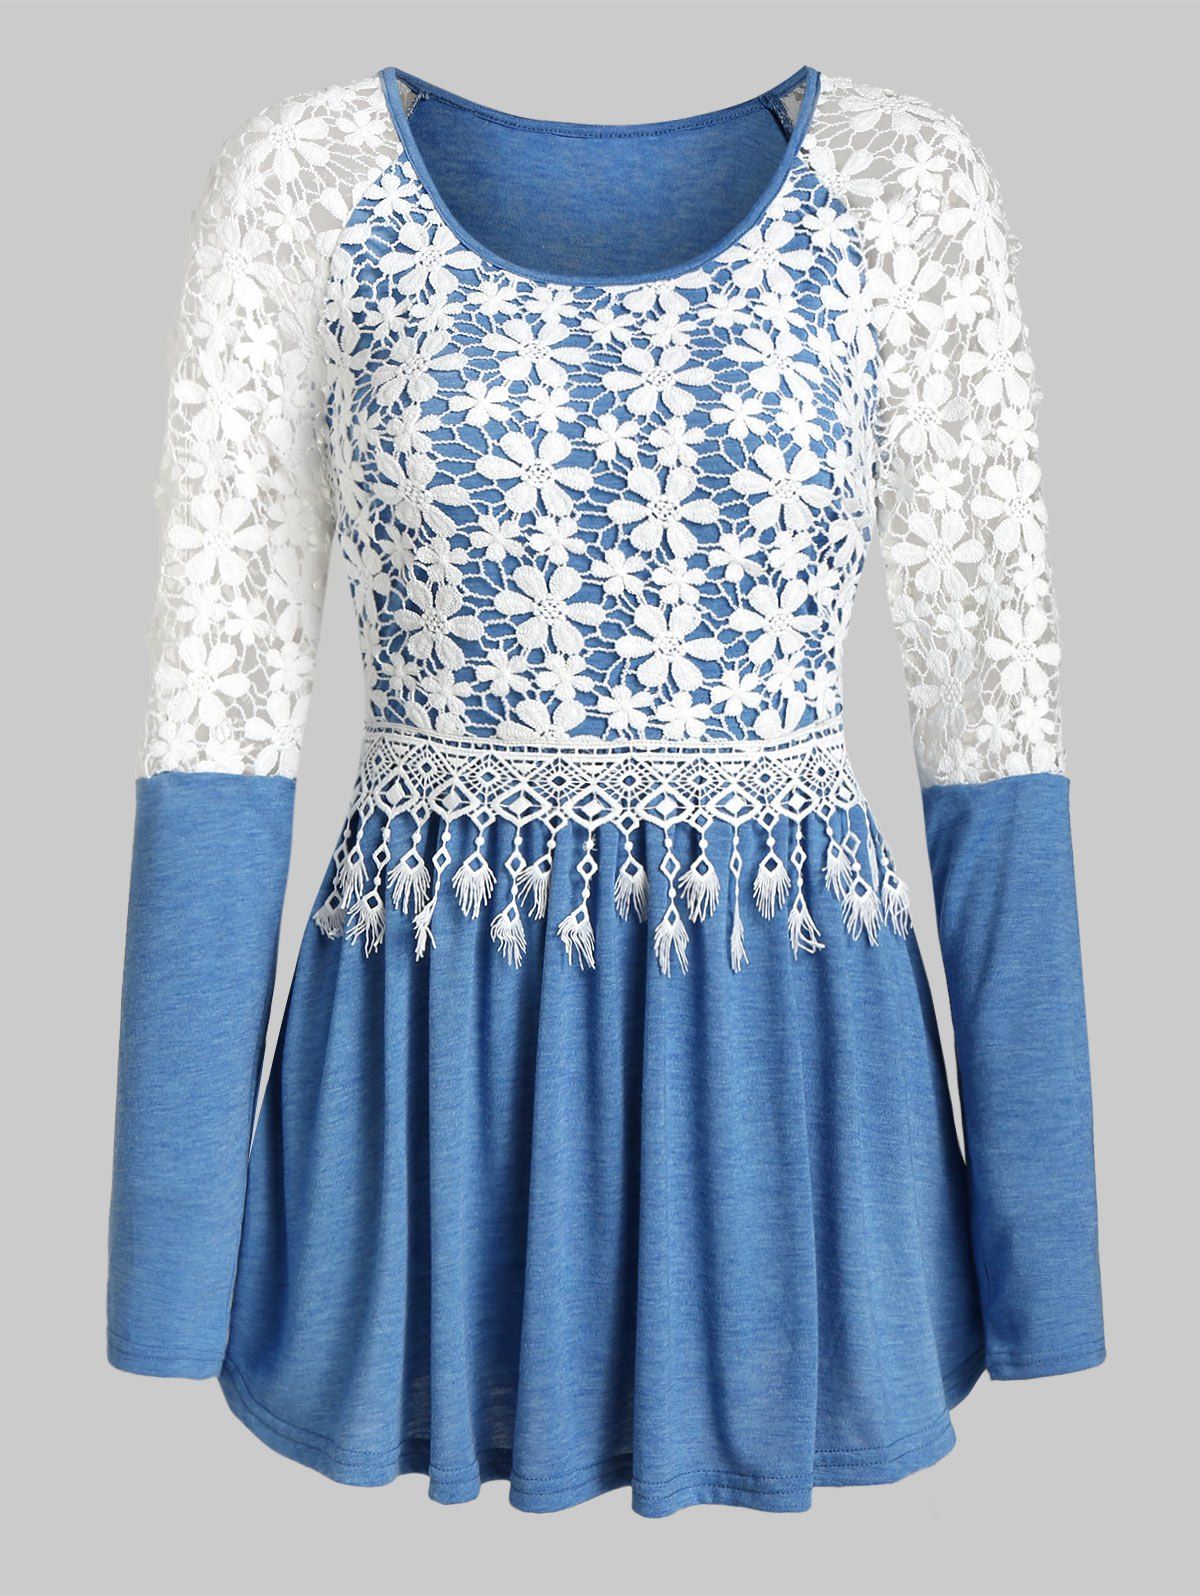 Floral Embroidery Hollow Out Sleeve Top - SILK BLUE M